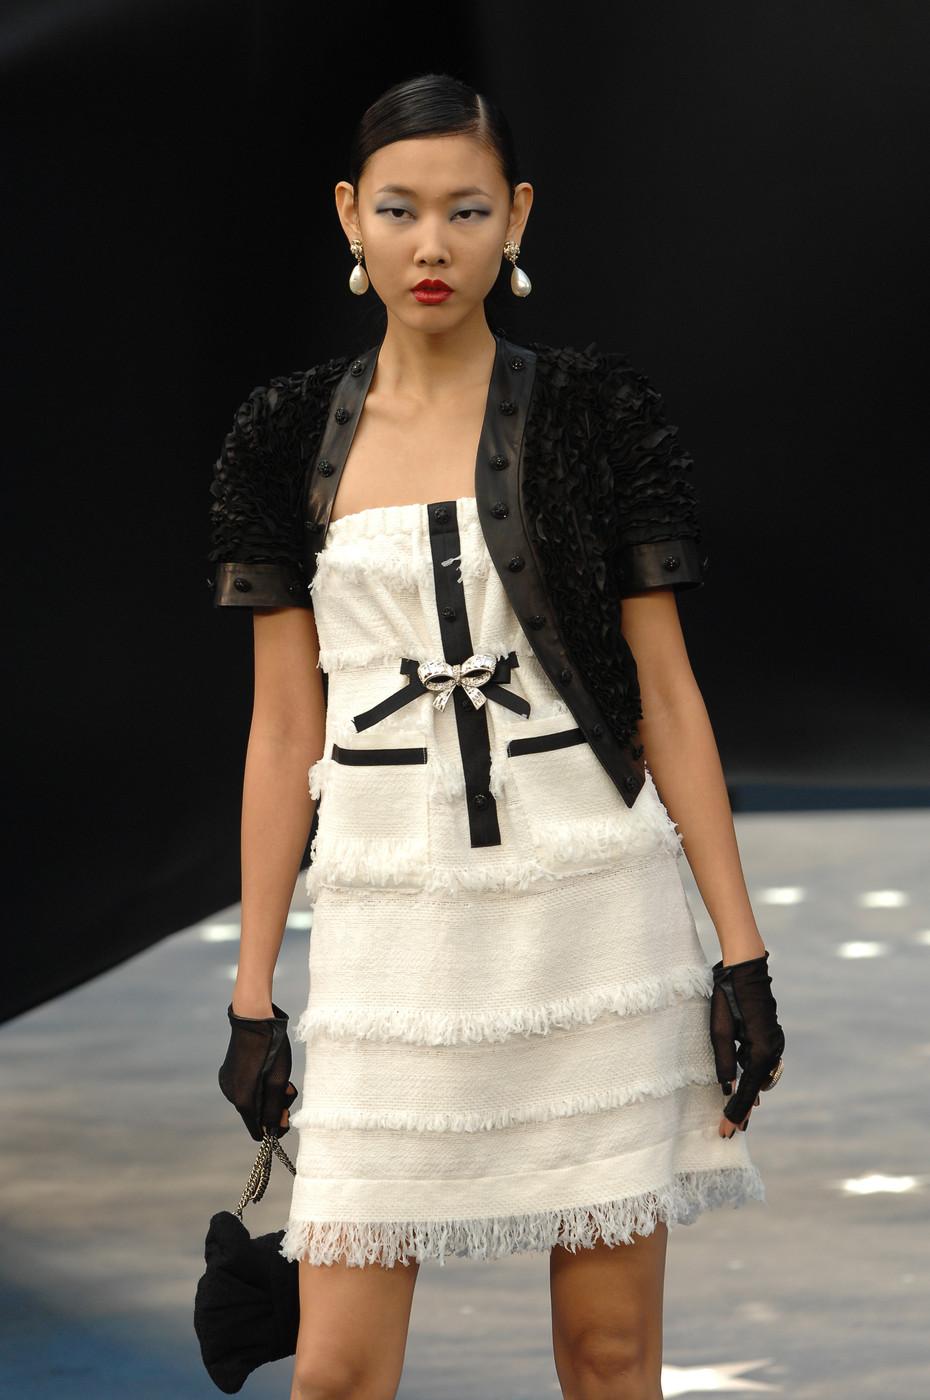 Very sweet Chanel dress from the Spring 2008 collection. White woven wool with layers of horizontal whiteout  fringe. Black satin detail at centre front with small black on black rhinestone buttons with star centers and tiny interlocking CC logos.